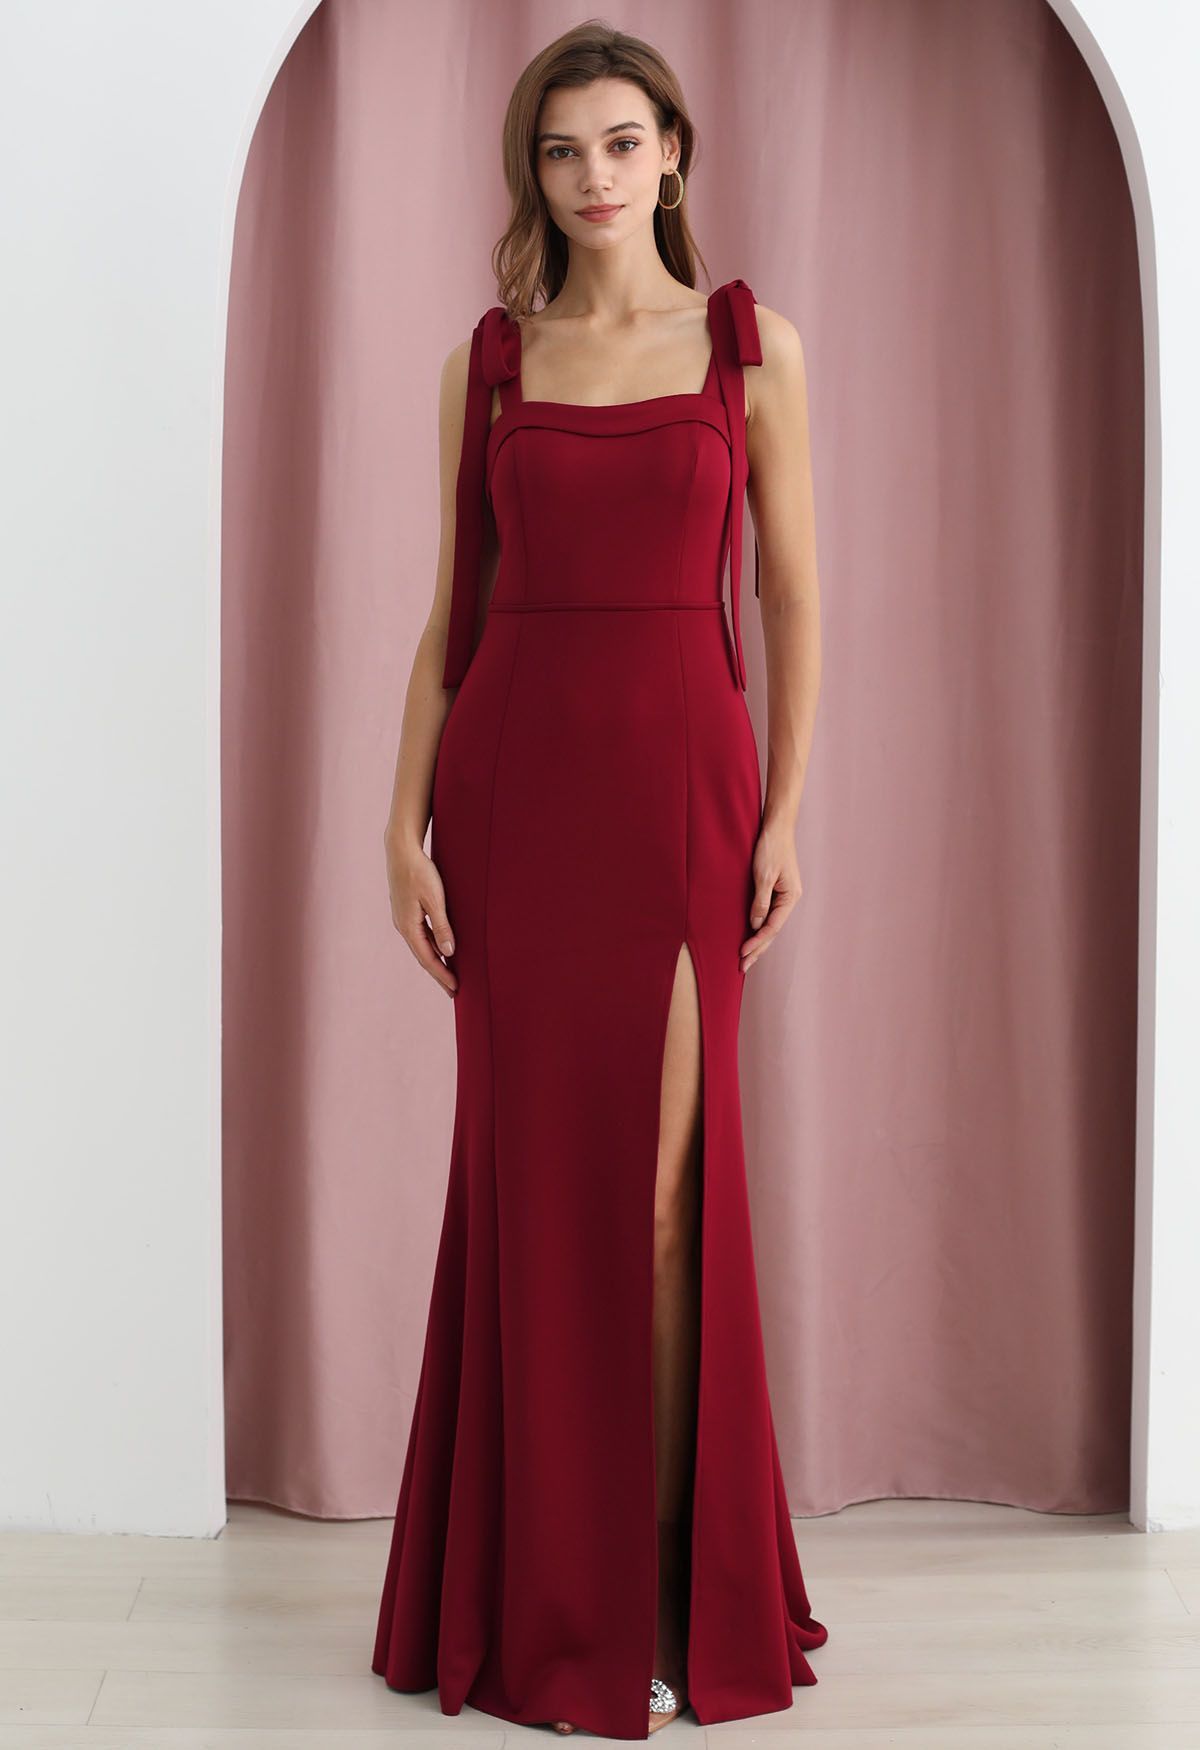 Tie-Shoulder High Slit Maxi Gown in Red | Chicwish